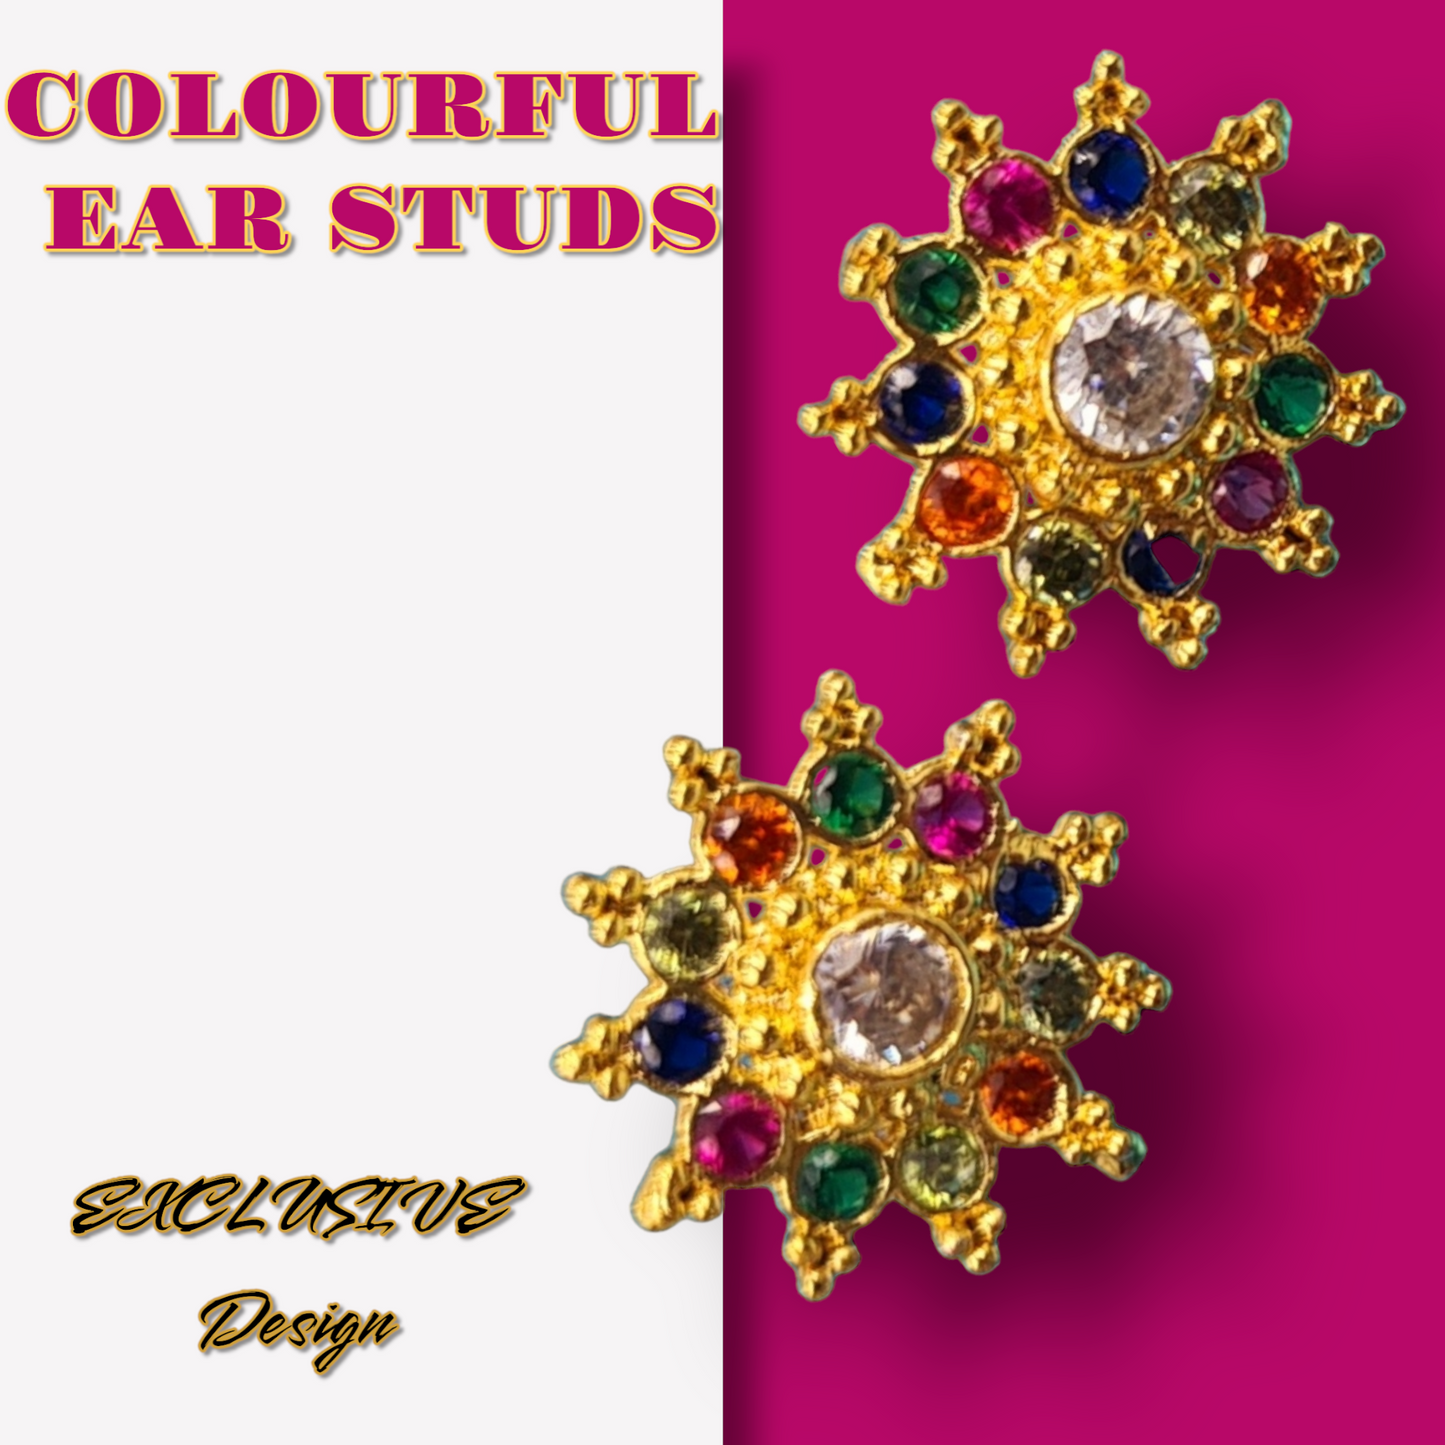 "Stunning Oversized Colored Sunflower Nose and Ear Studs"